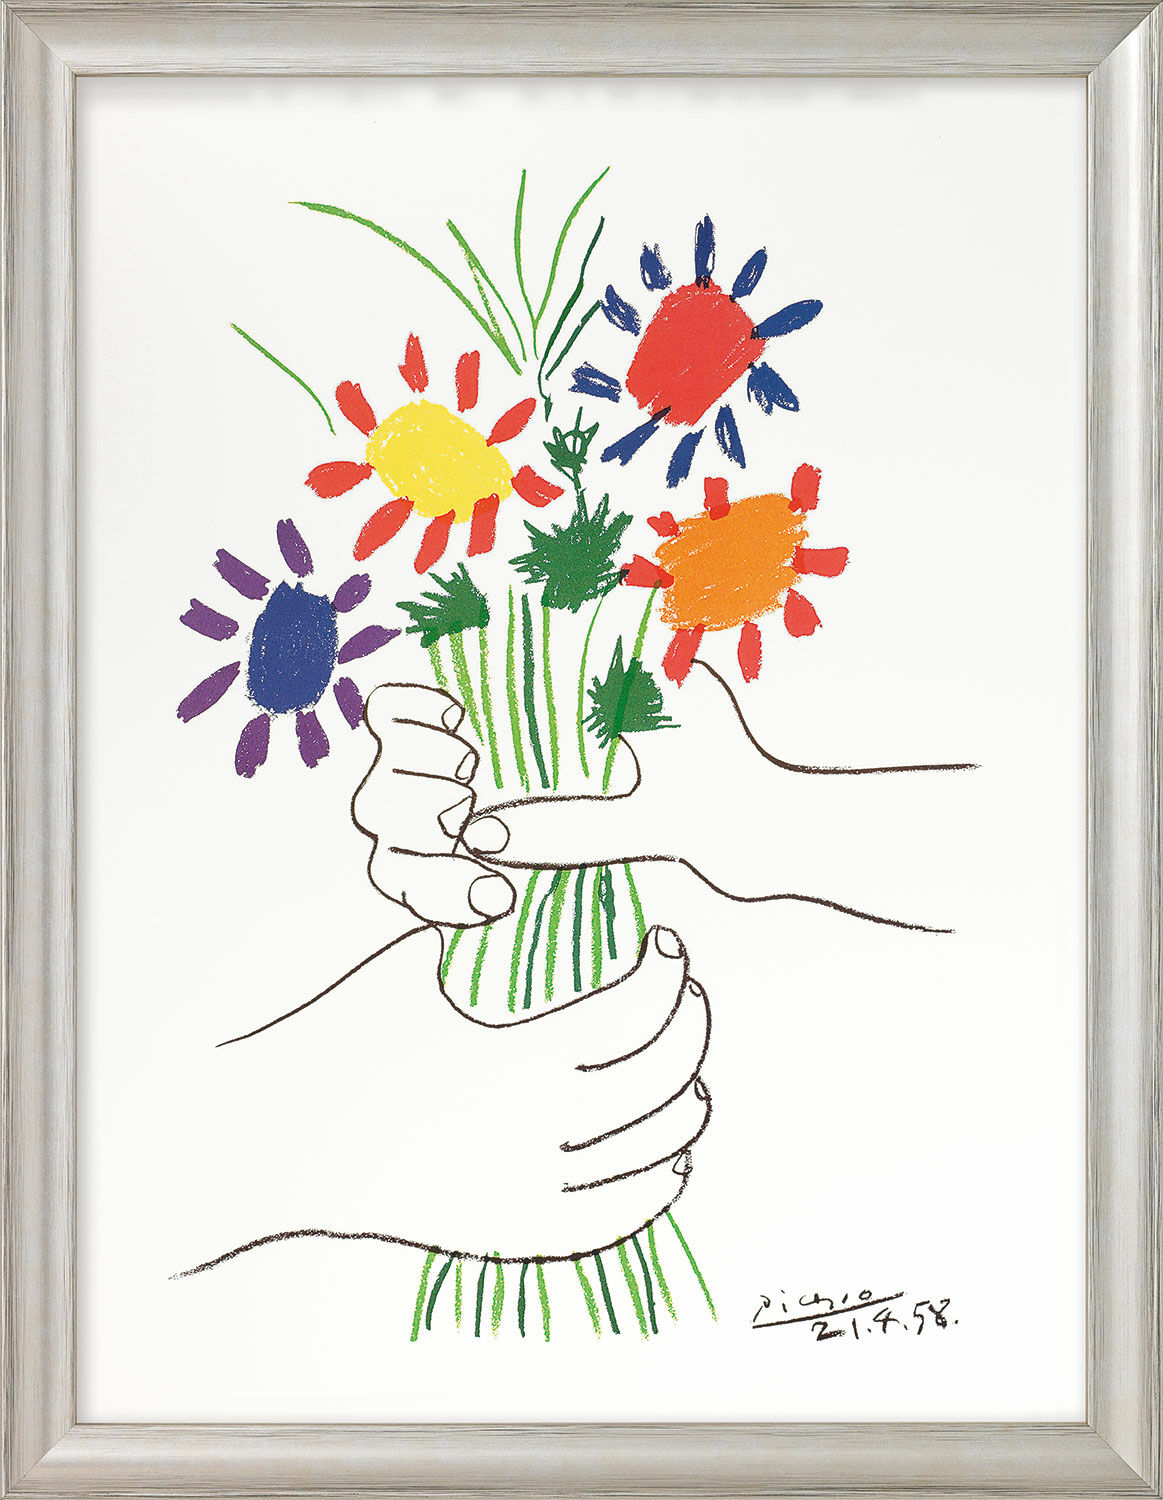 Picture "Hands with Bouquet of Flowers" (1958), framed by Pablo Picasso